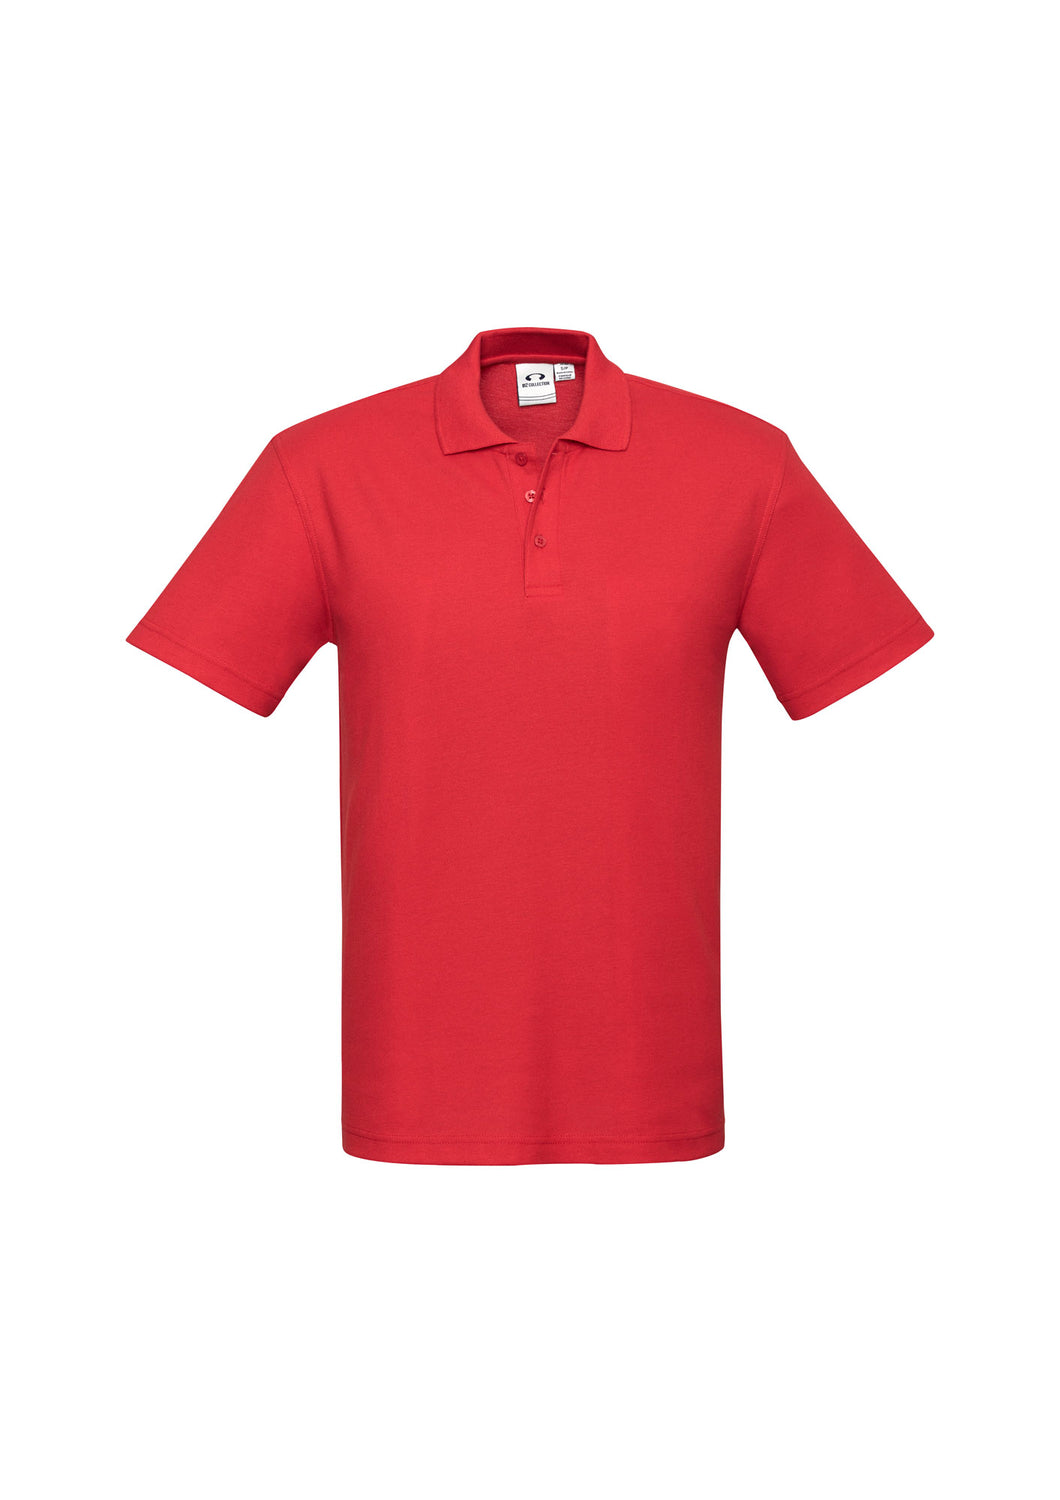 Kids Classic Pique Knit Polo - Red